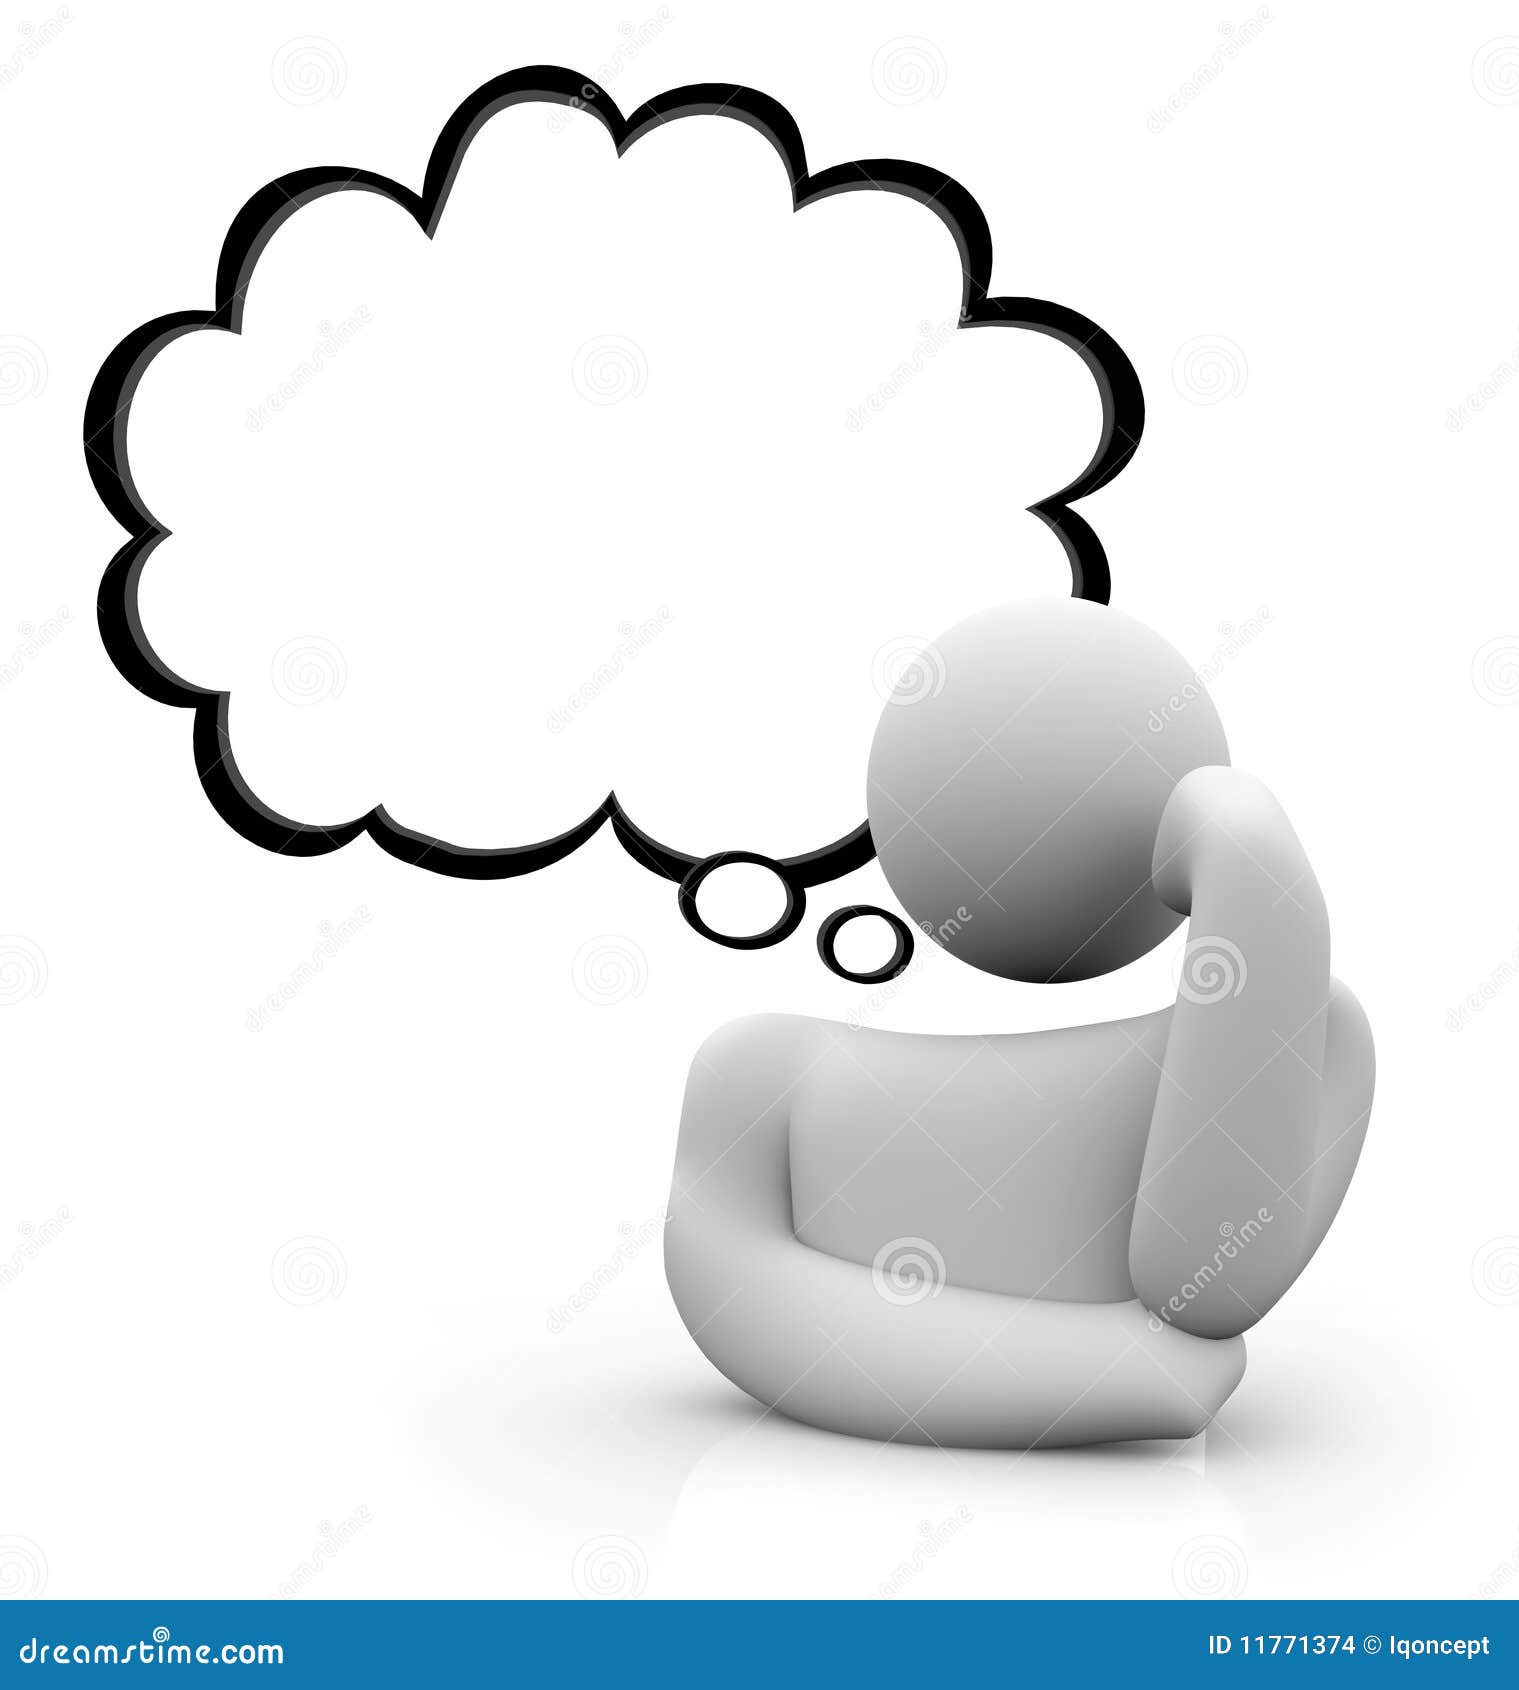 Thought Bubble - Thinking Person Stock Images - Image: 11771374